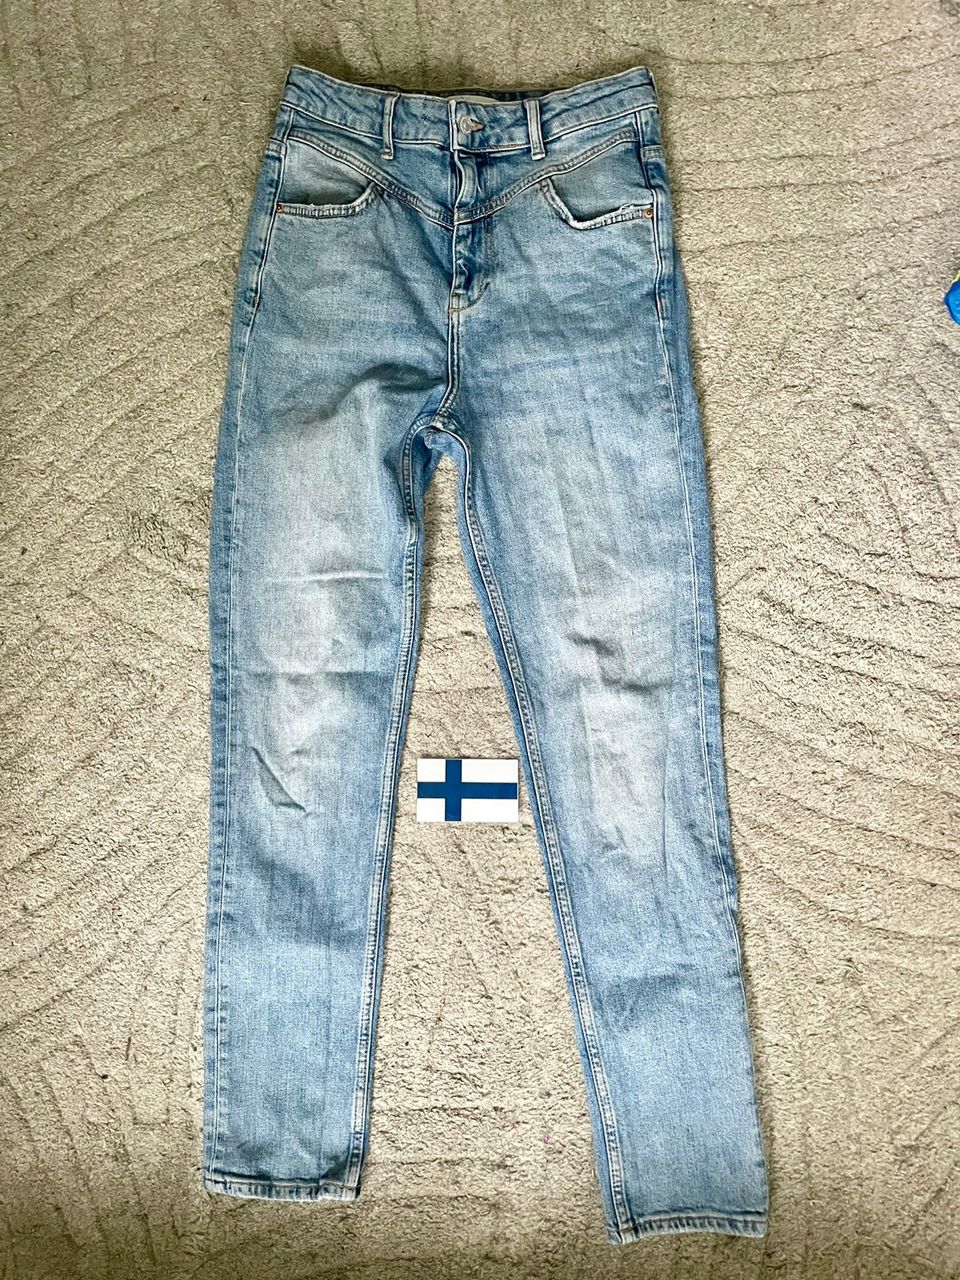 Ginatricot perfect jeans very high waist mom / skinny jeans 38